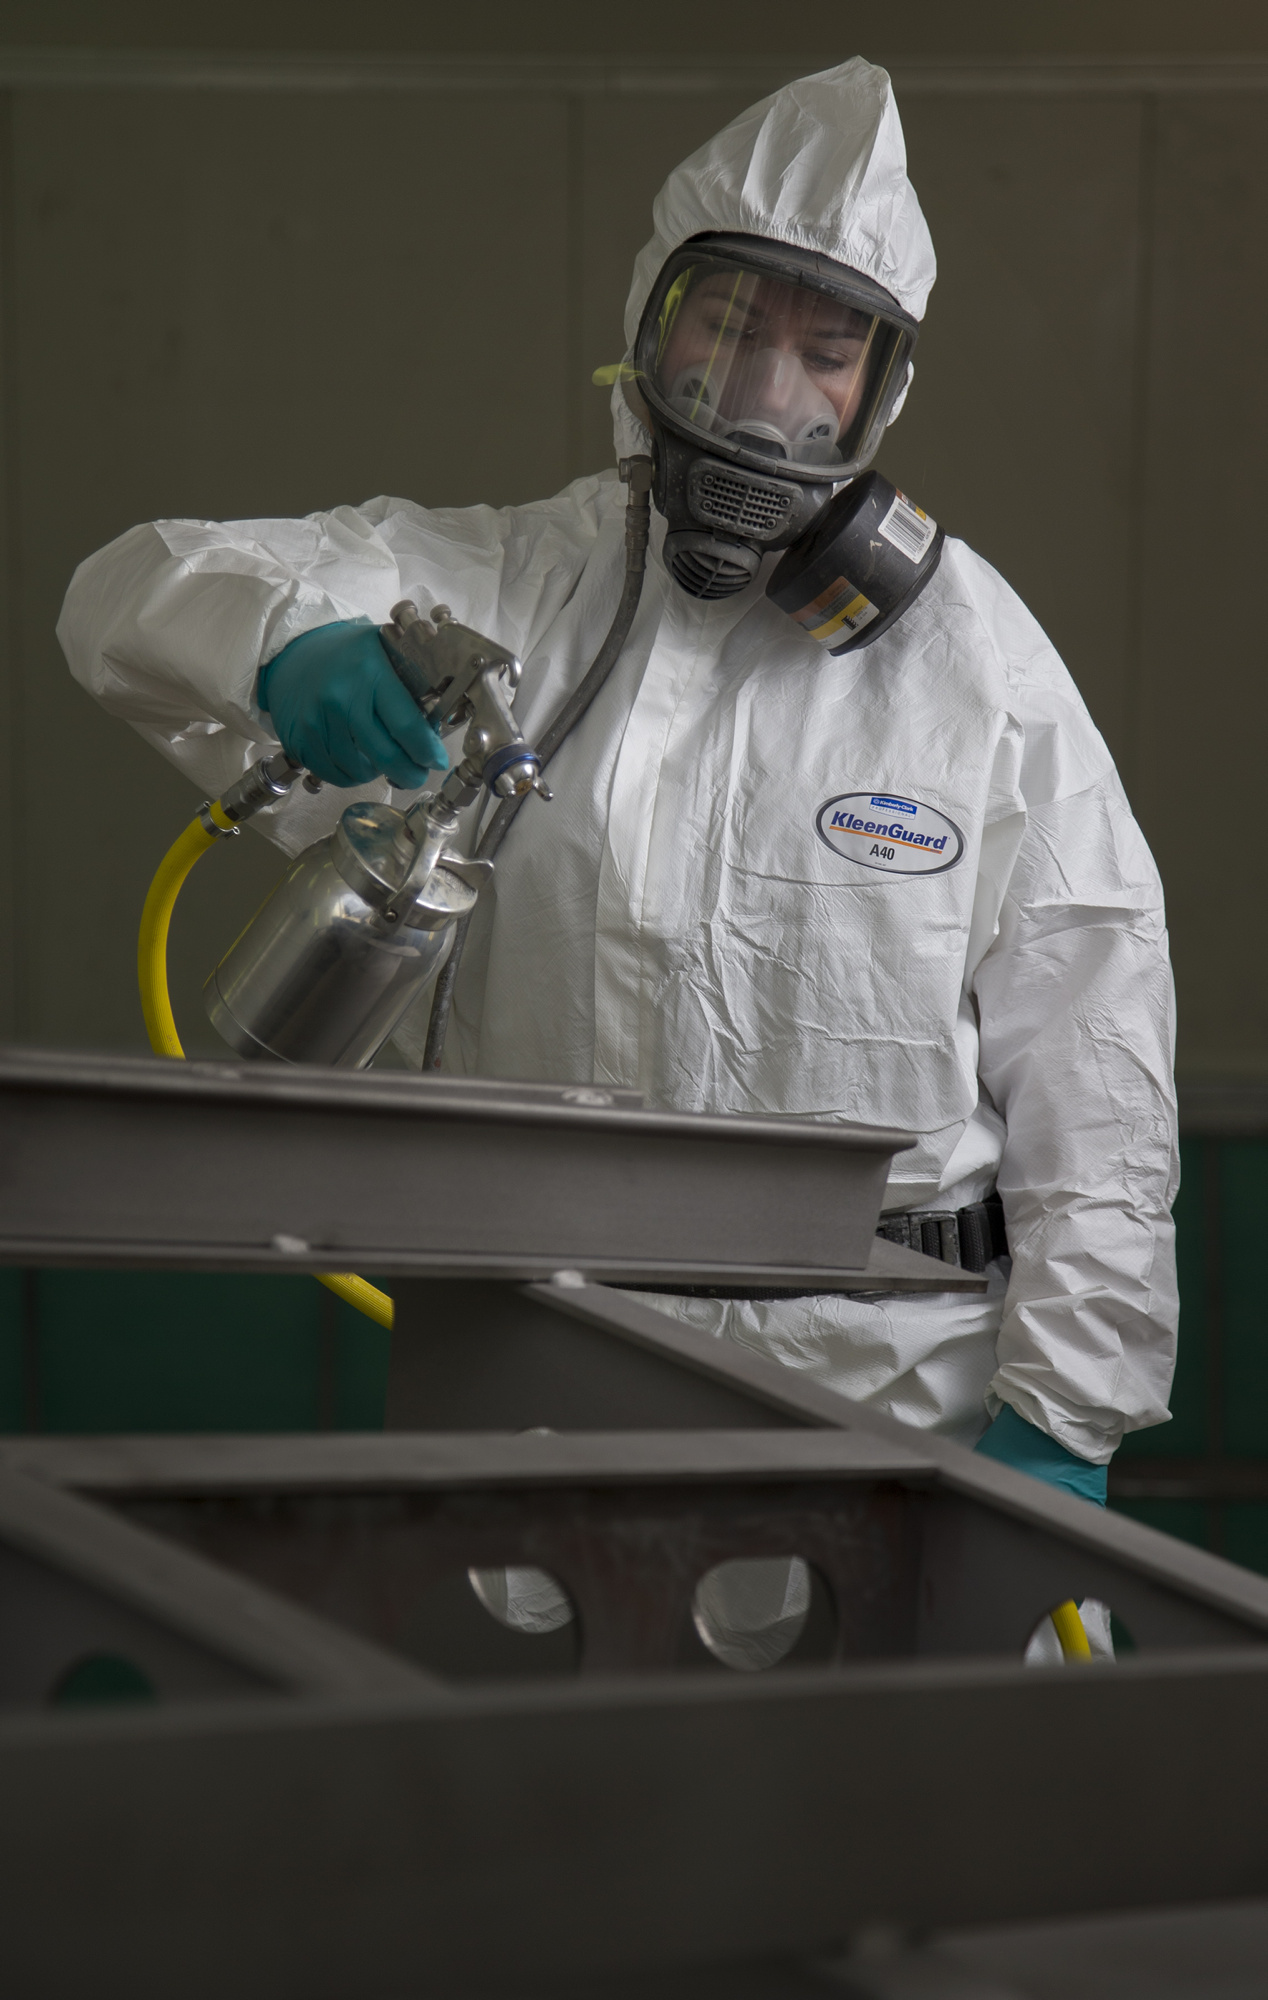    Seaman Boatswains Mate Georgia Christie prepares to paint a bilge keel in a spray booth that was transferred from the Air Force to the HMAS Stirling Fleet Support Unit's Corrosion Control section. 